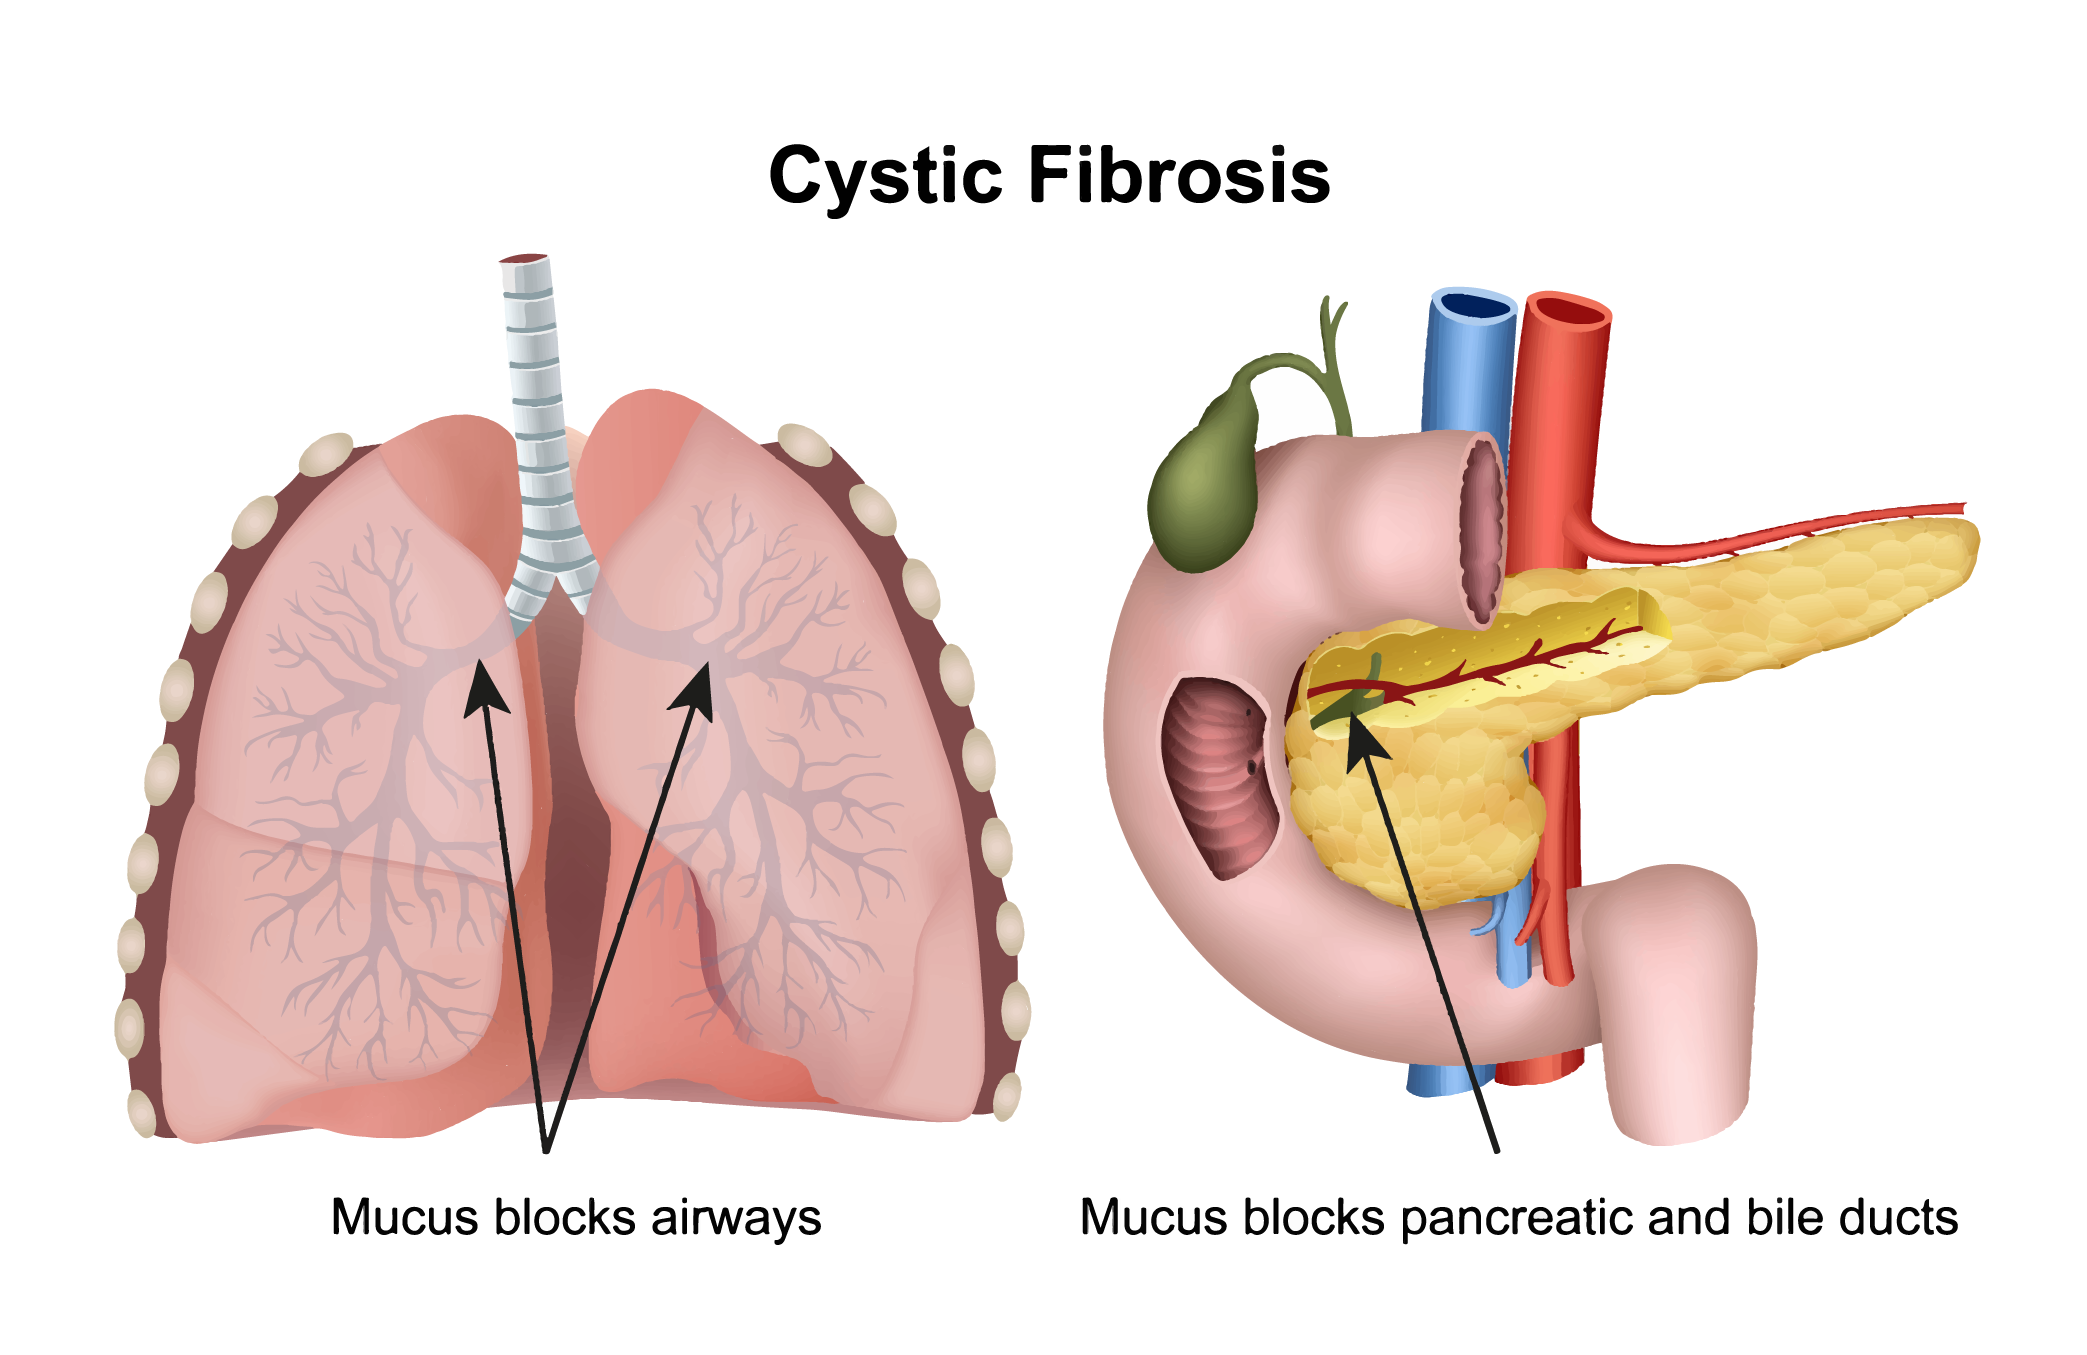 A diagram of the human lungs and pancreas that illustrates mucus blockage in patients with cystic fibrosis.